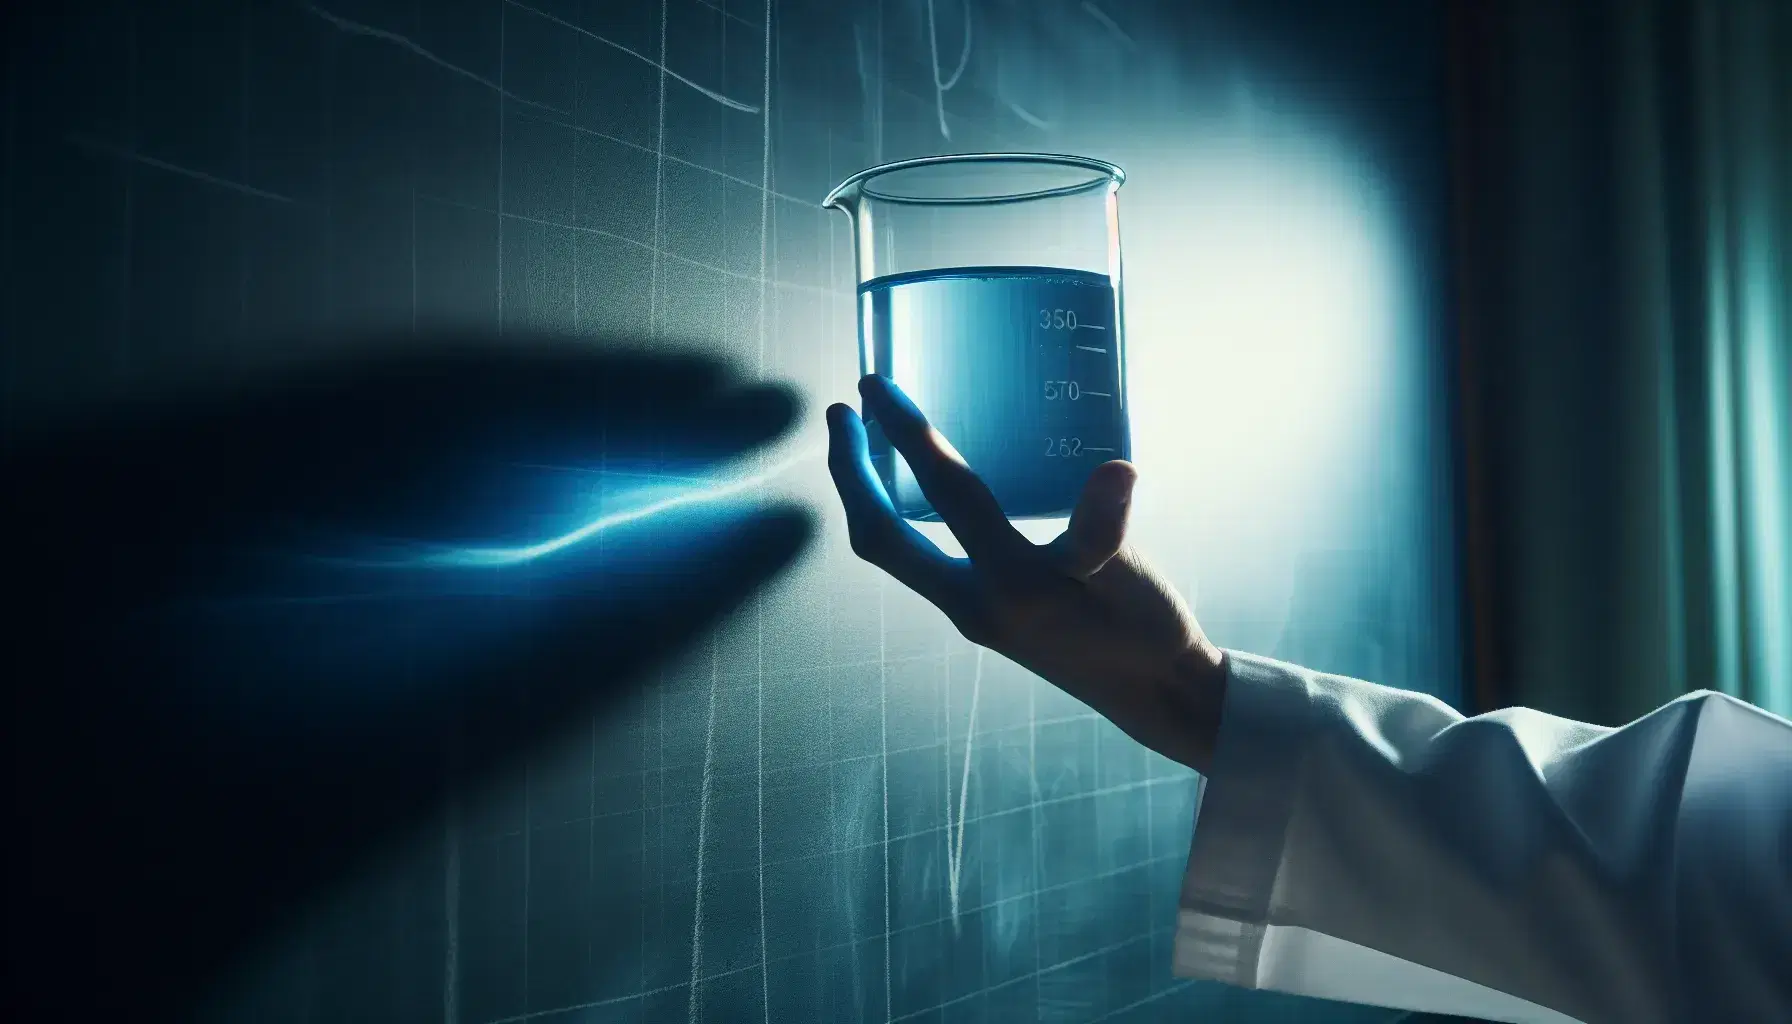 Close-up view of a hand in a white lab coat holding a beaker with blue liquid, with a clean blackboard in the background and light reflections.